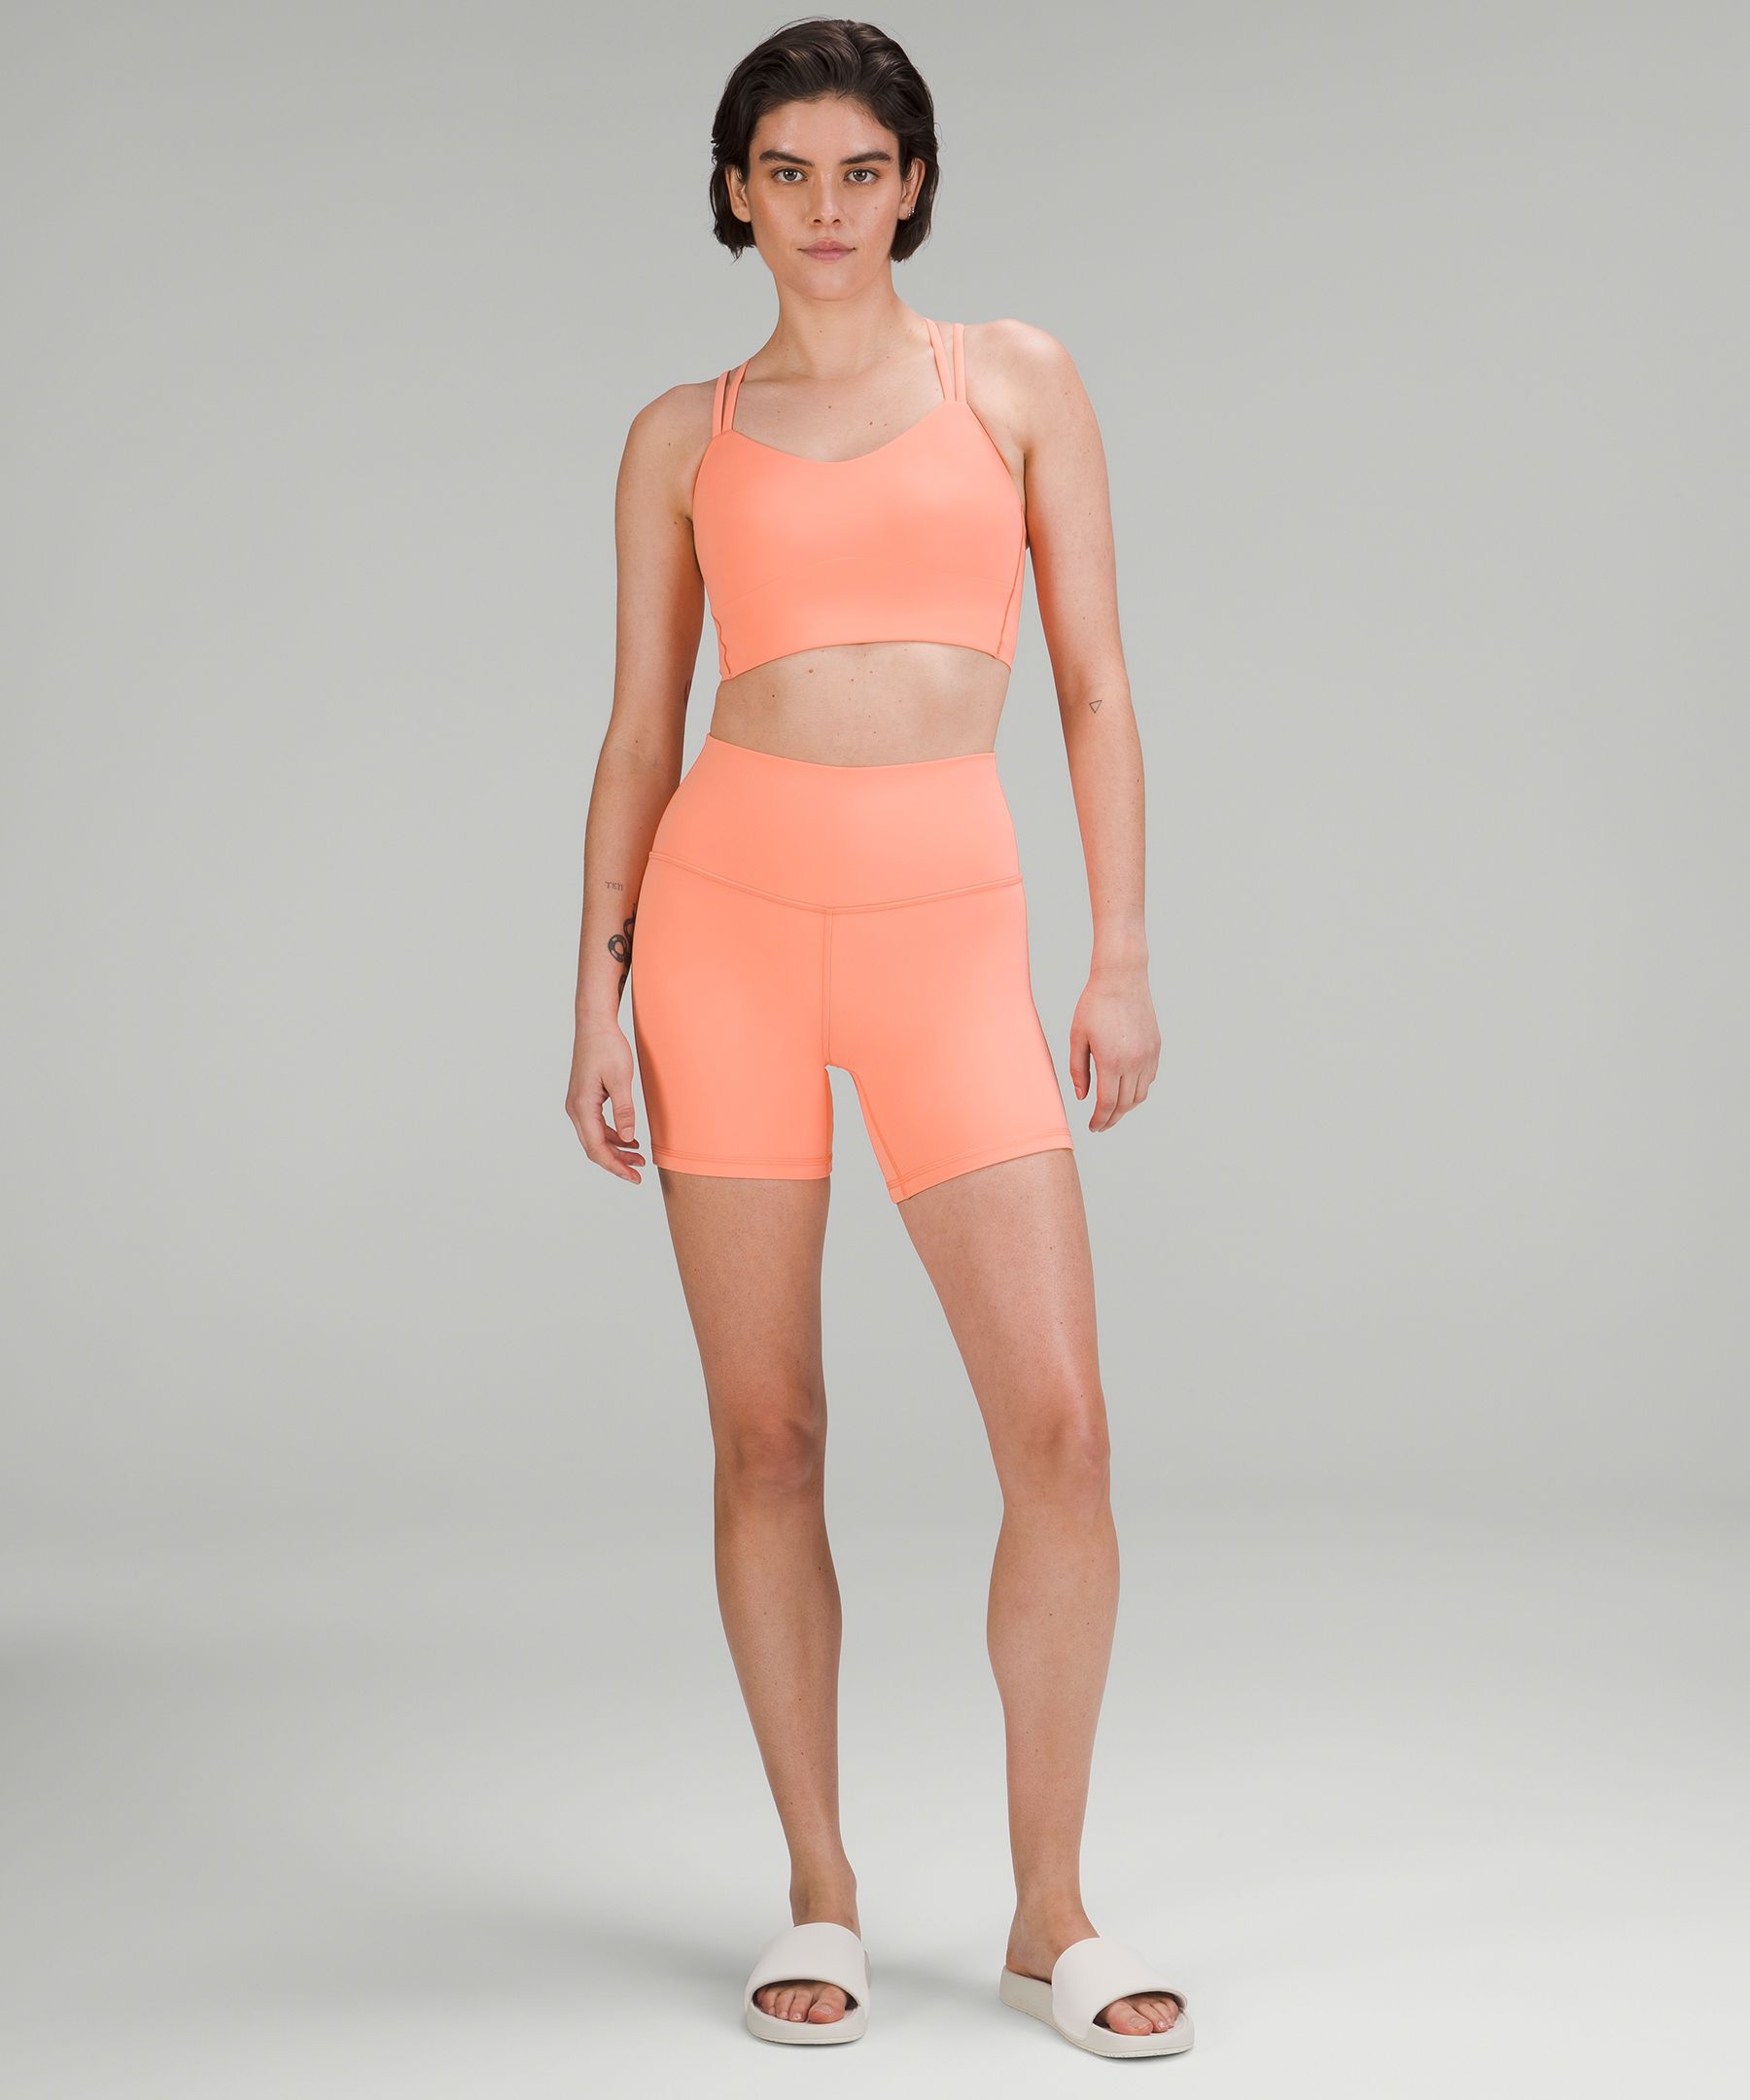 The brighter the better. Lip gloss Align 6” shorts and high-neck